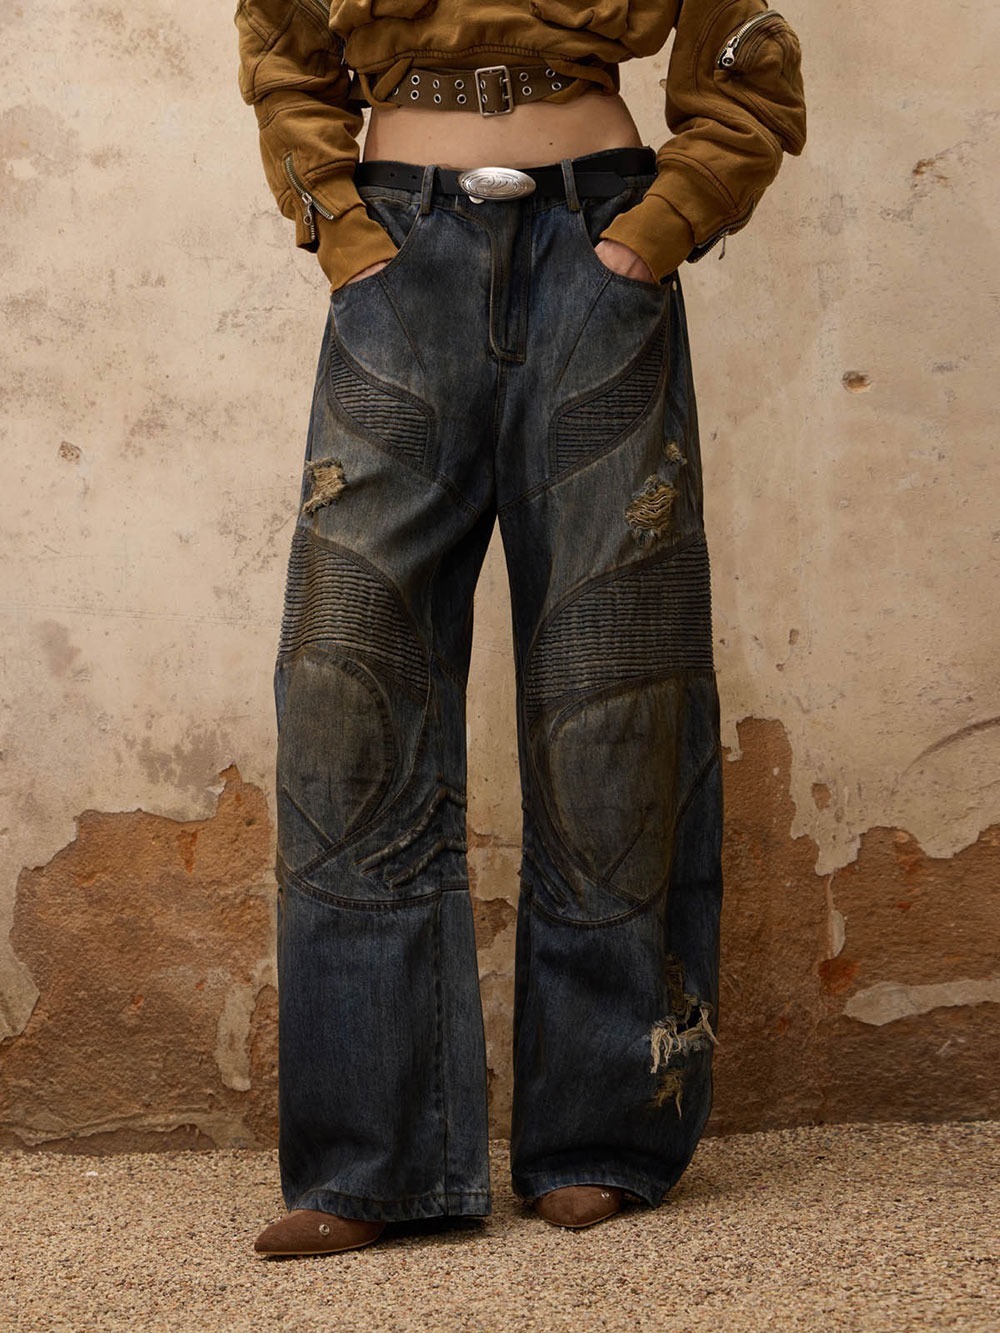 [PERSONSOUL] Stained Armor Denim